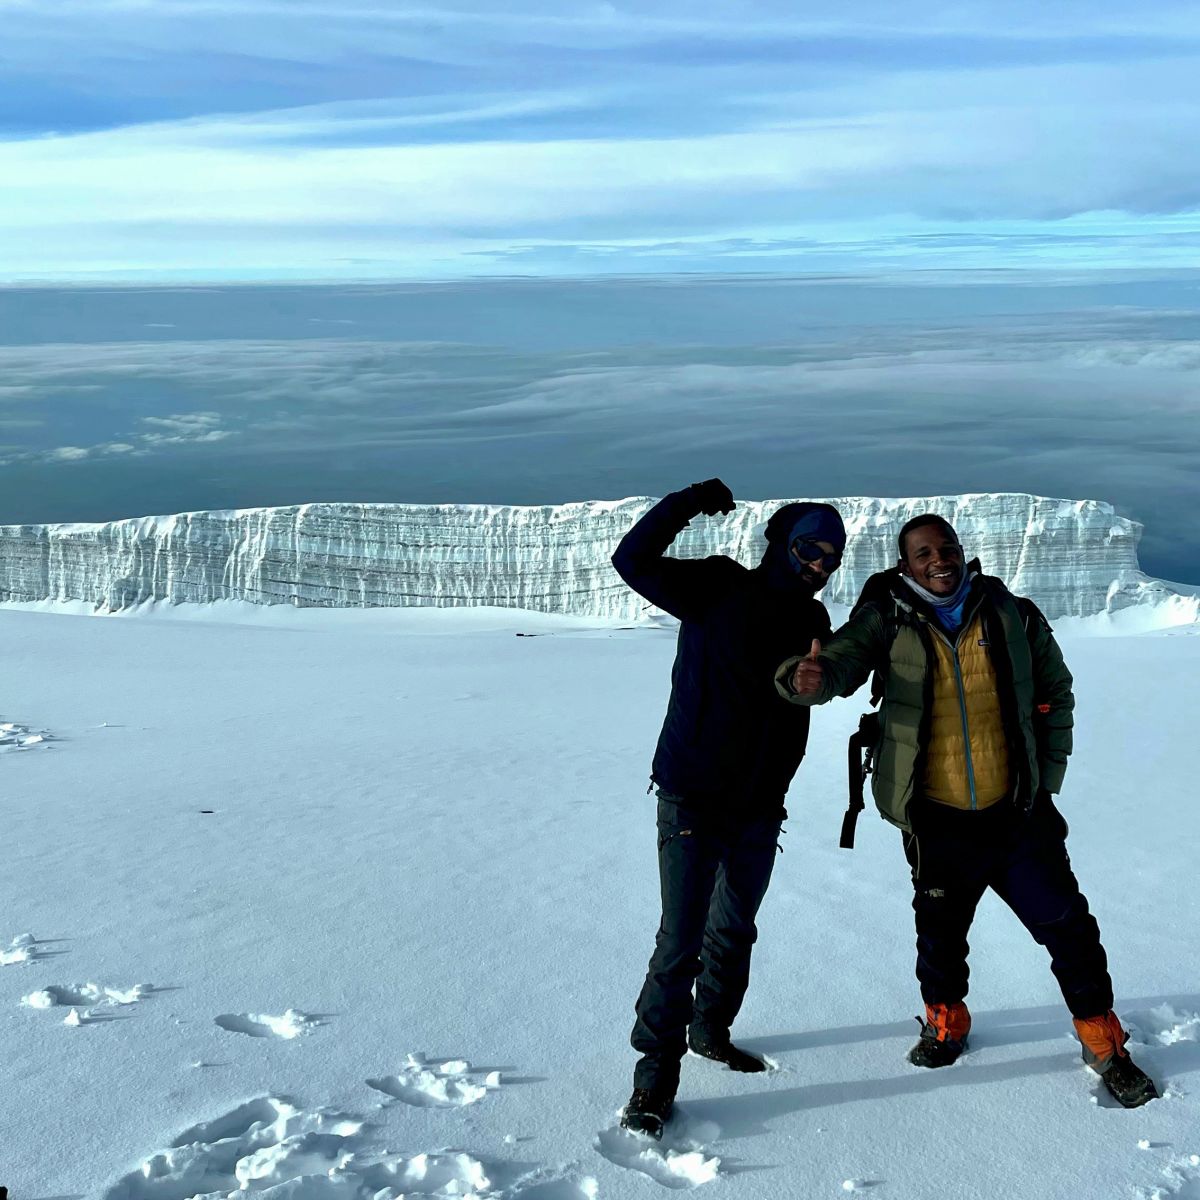 Two trekkers in the snow near the summit of Kilimanjaro with glacier behind them